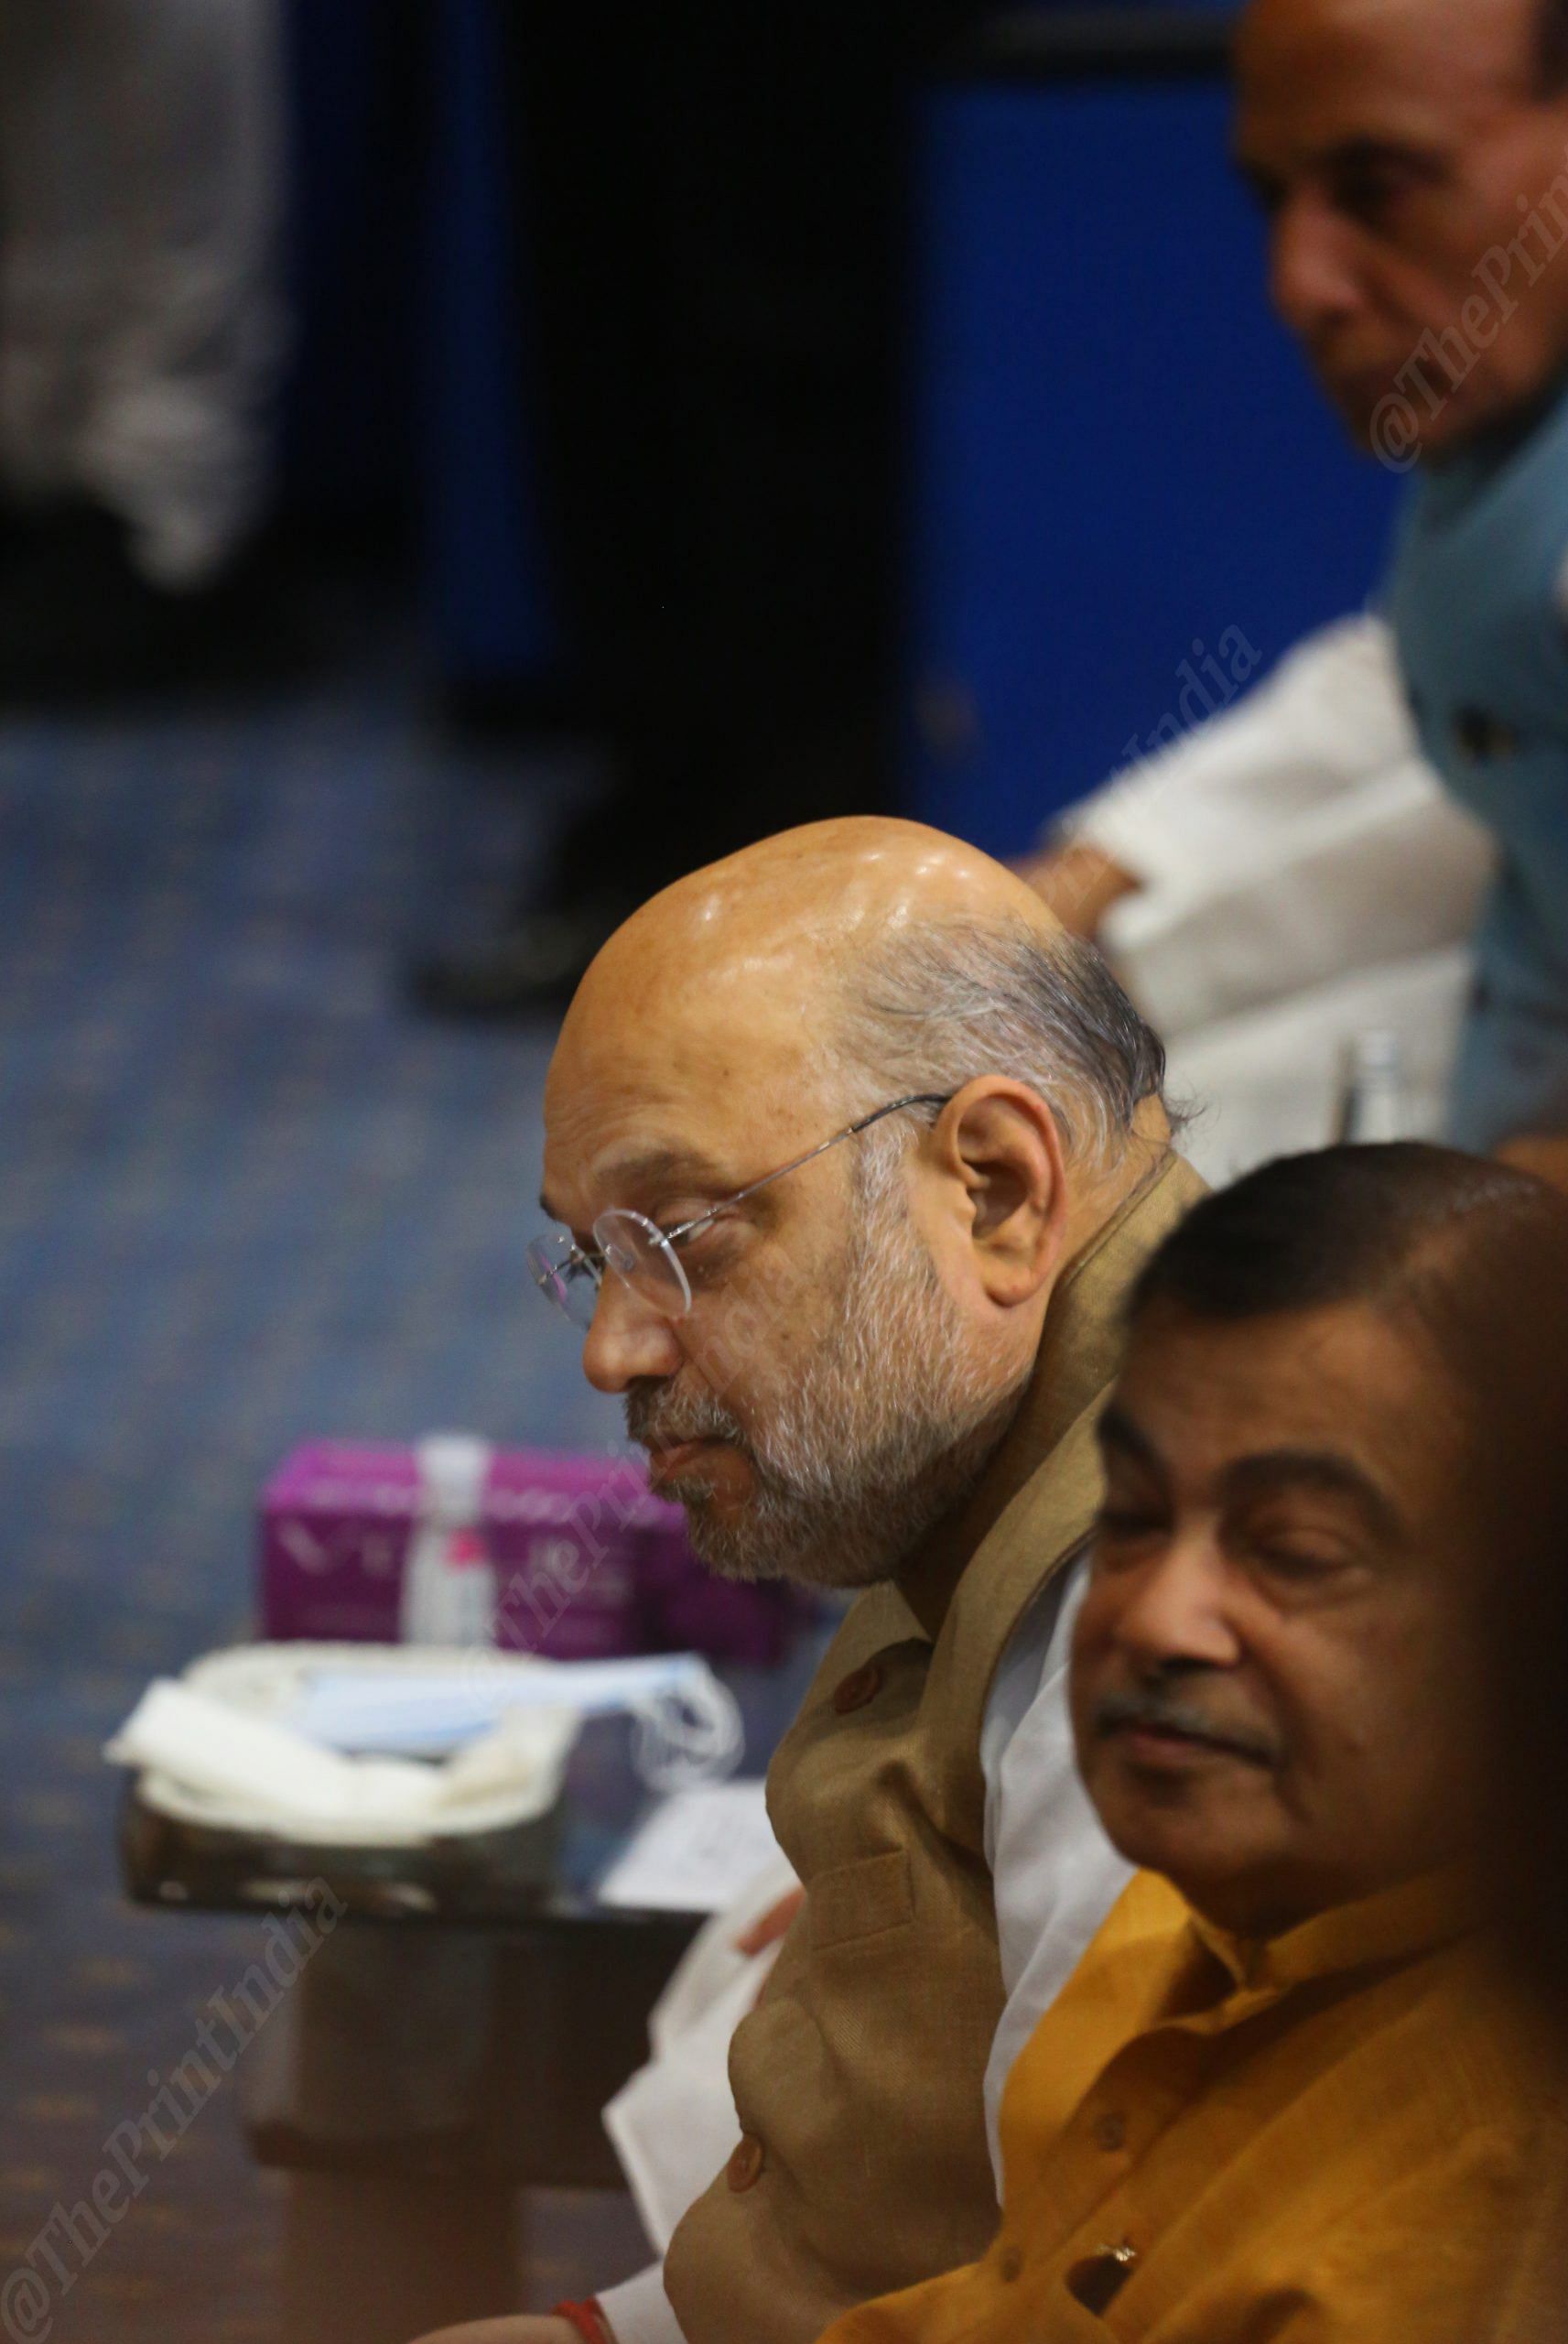 Home minister Amit Shah in a thoughtful mood | Photo: Praveen Jain | ThePrint